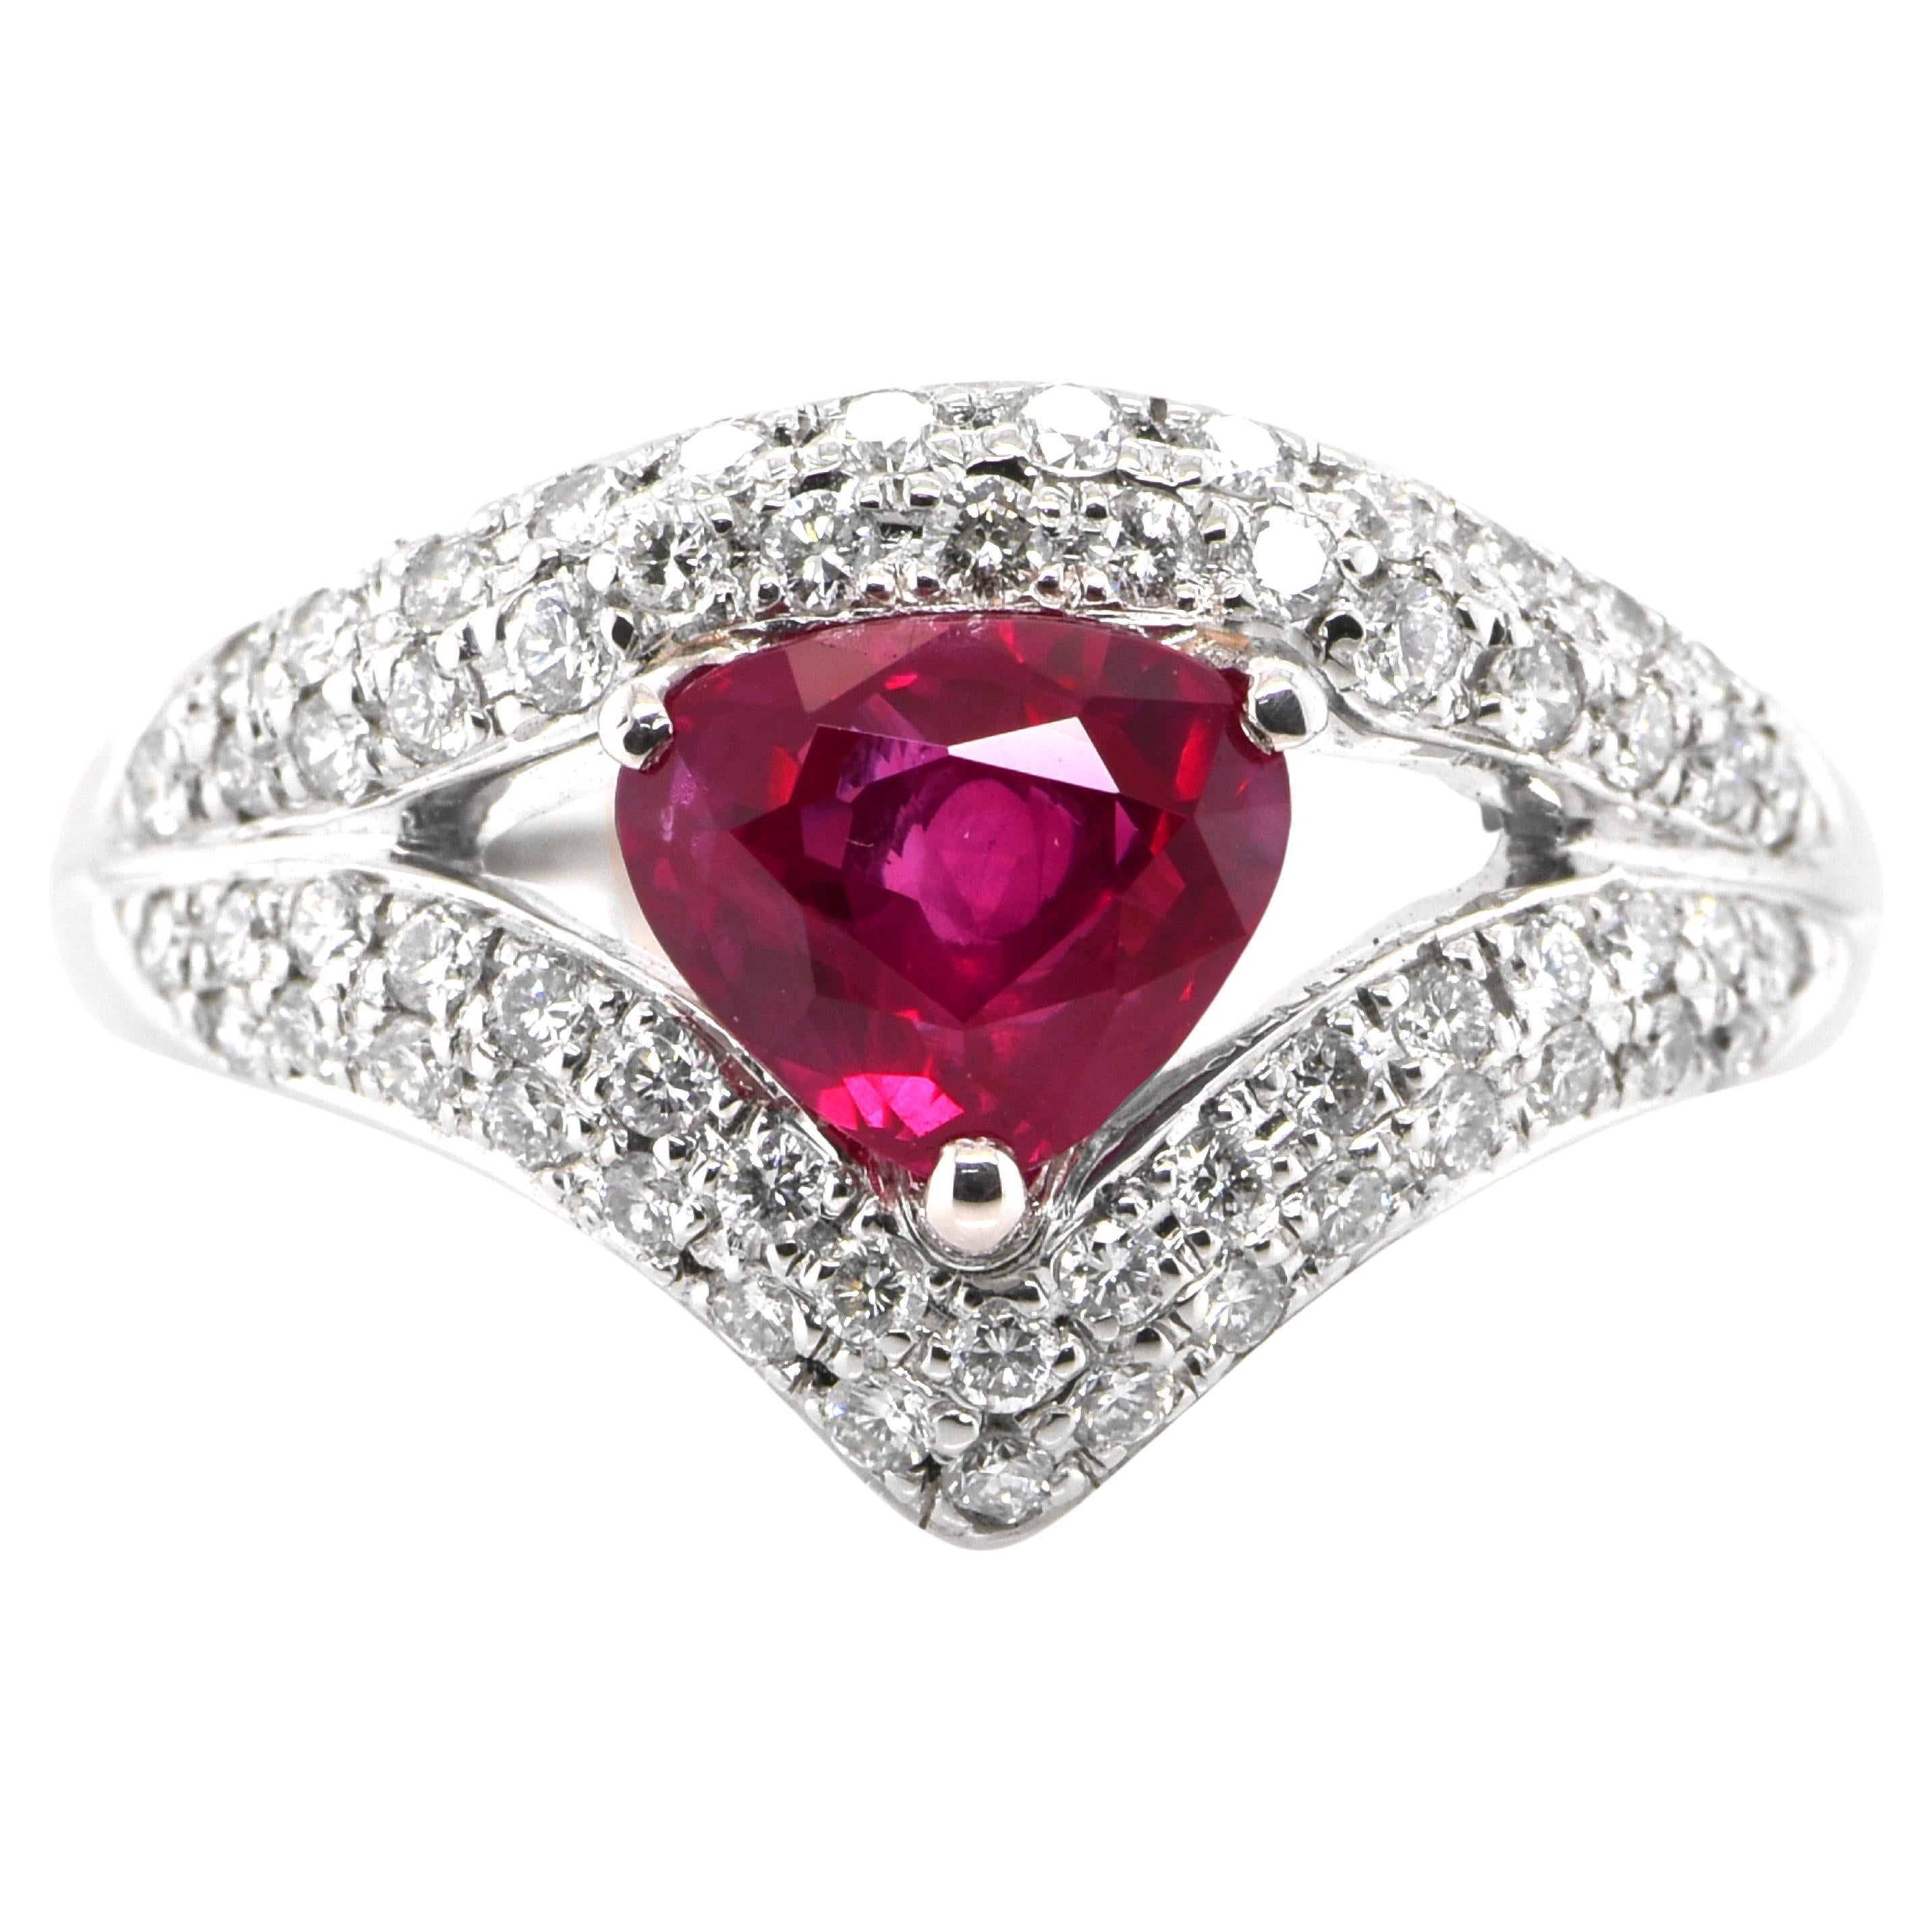 GIA Certified 1.49 Carat Natural Burmese Ruby and Diamond Ring set in Platinum For Sale